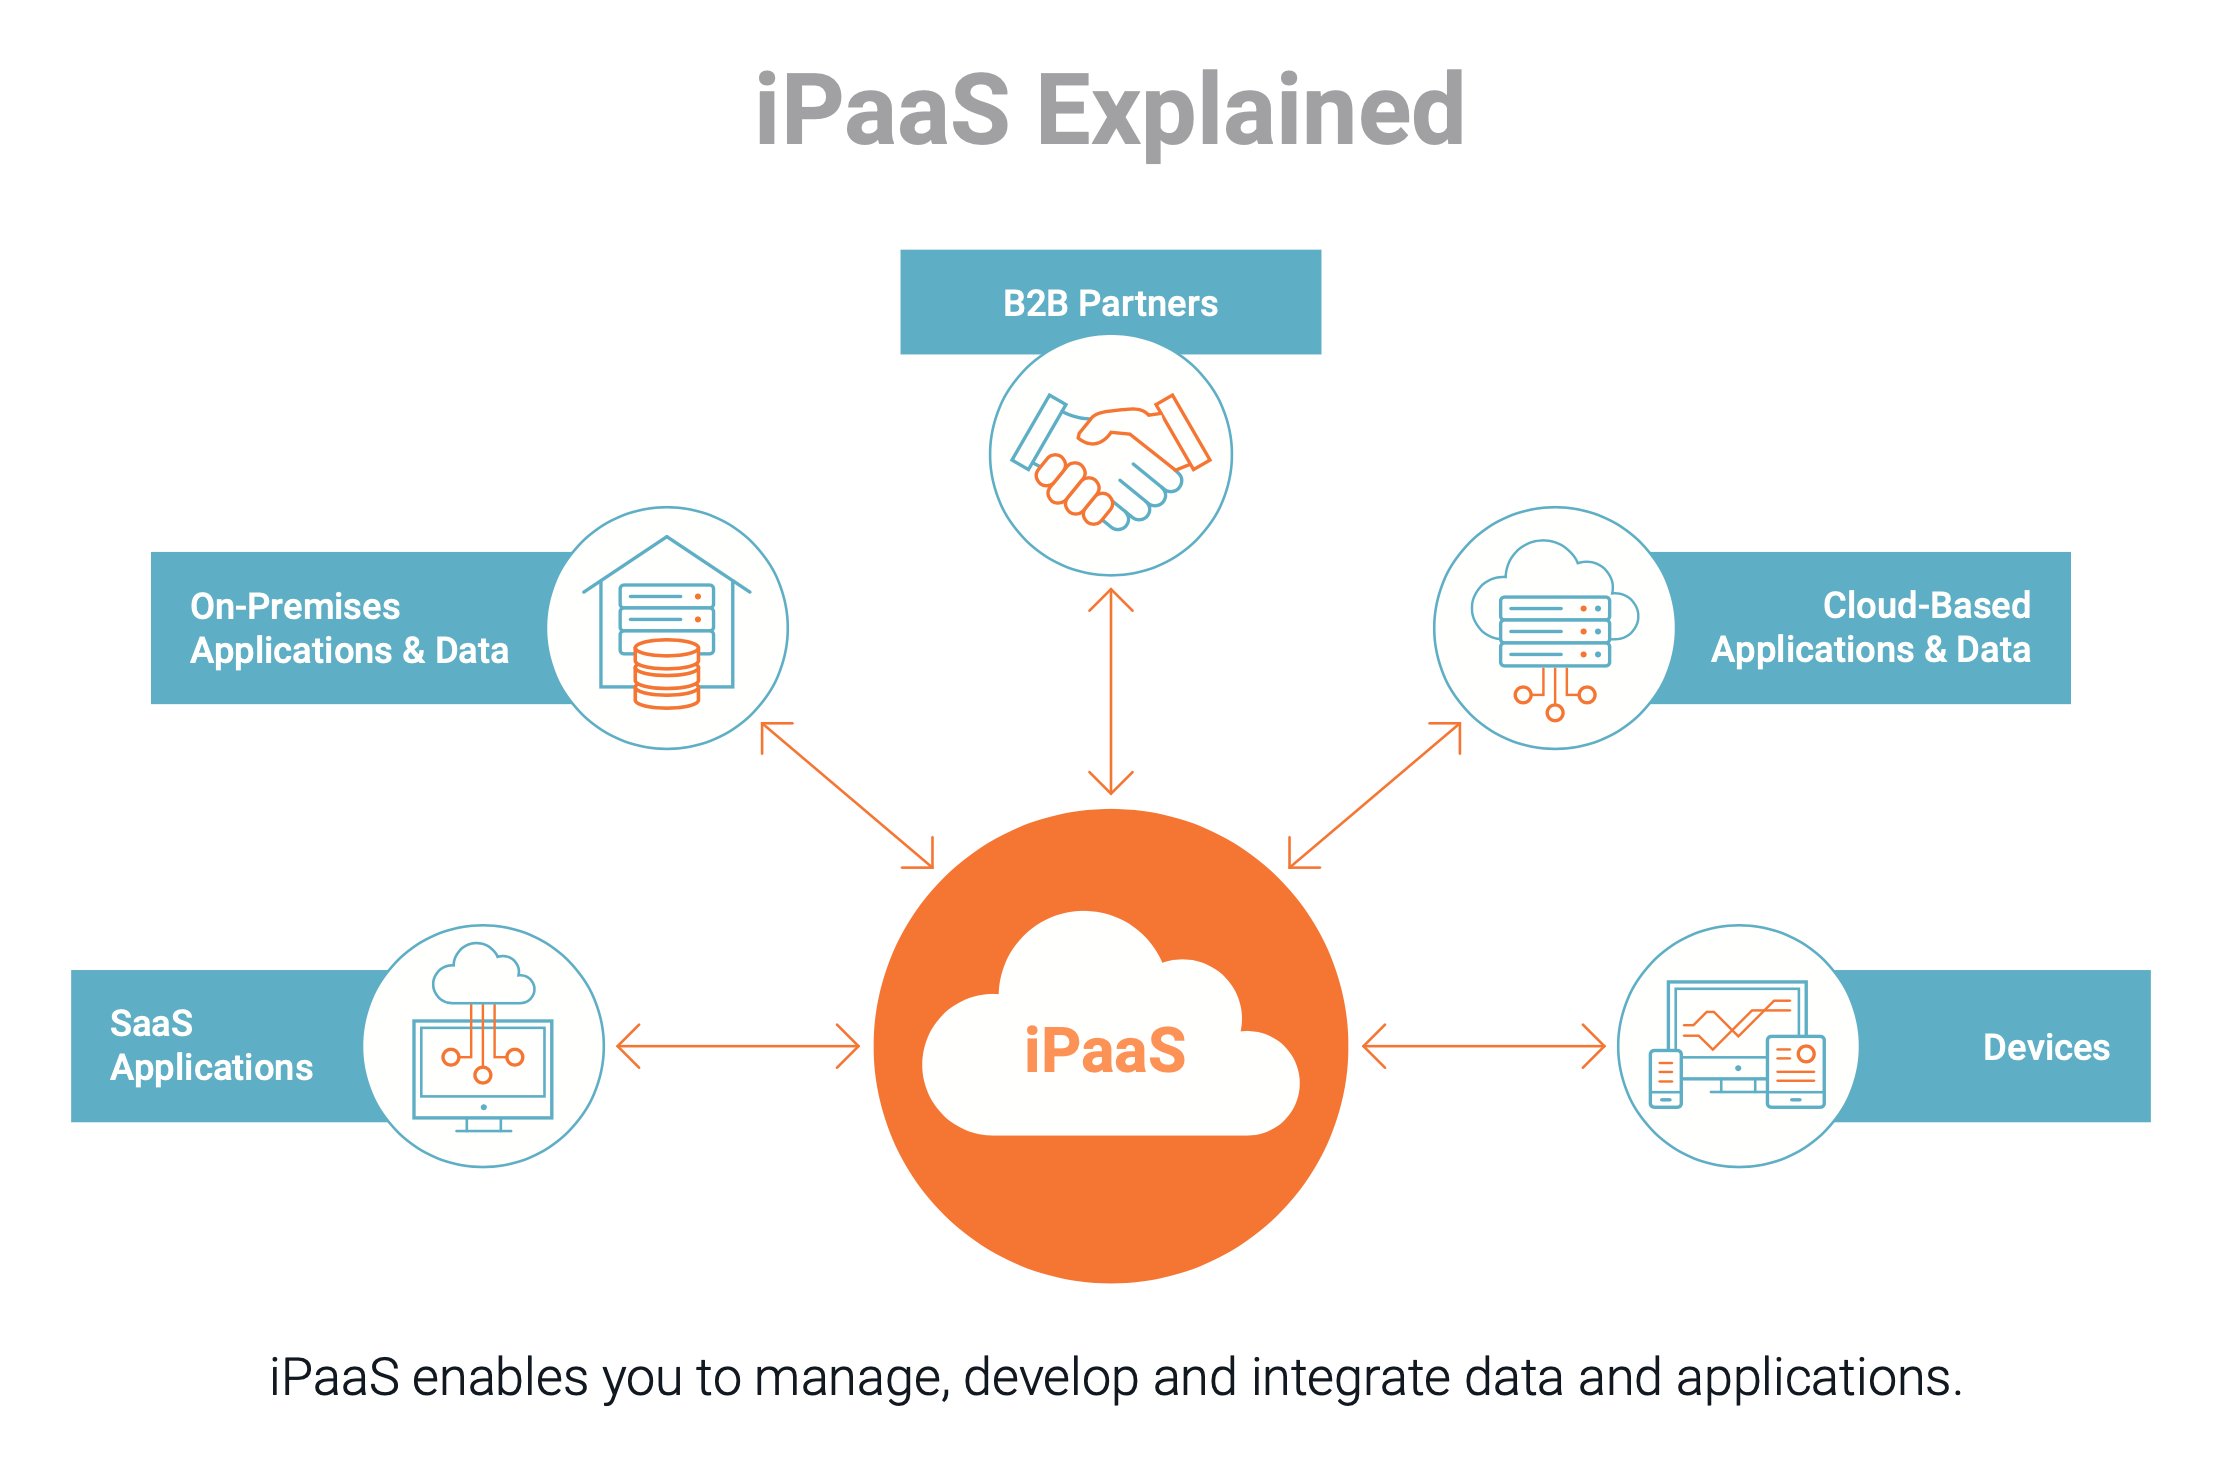 iPaaS is a cloud-based solution that enables integration between applications, data sources and systems.